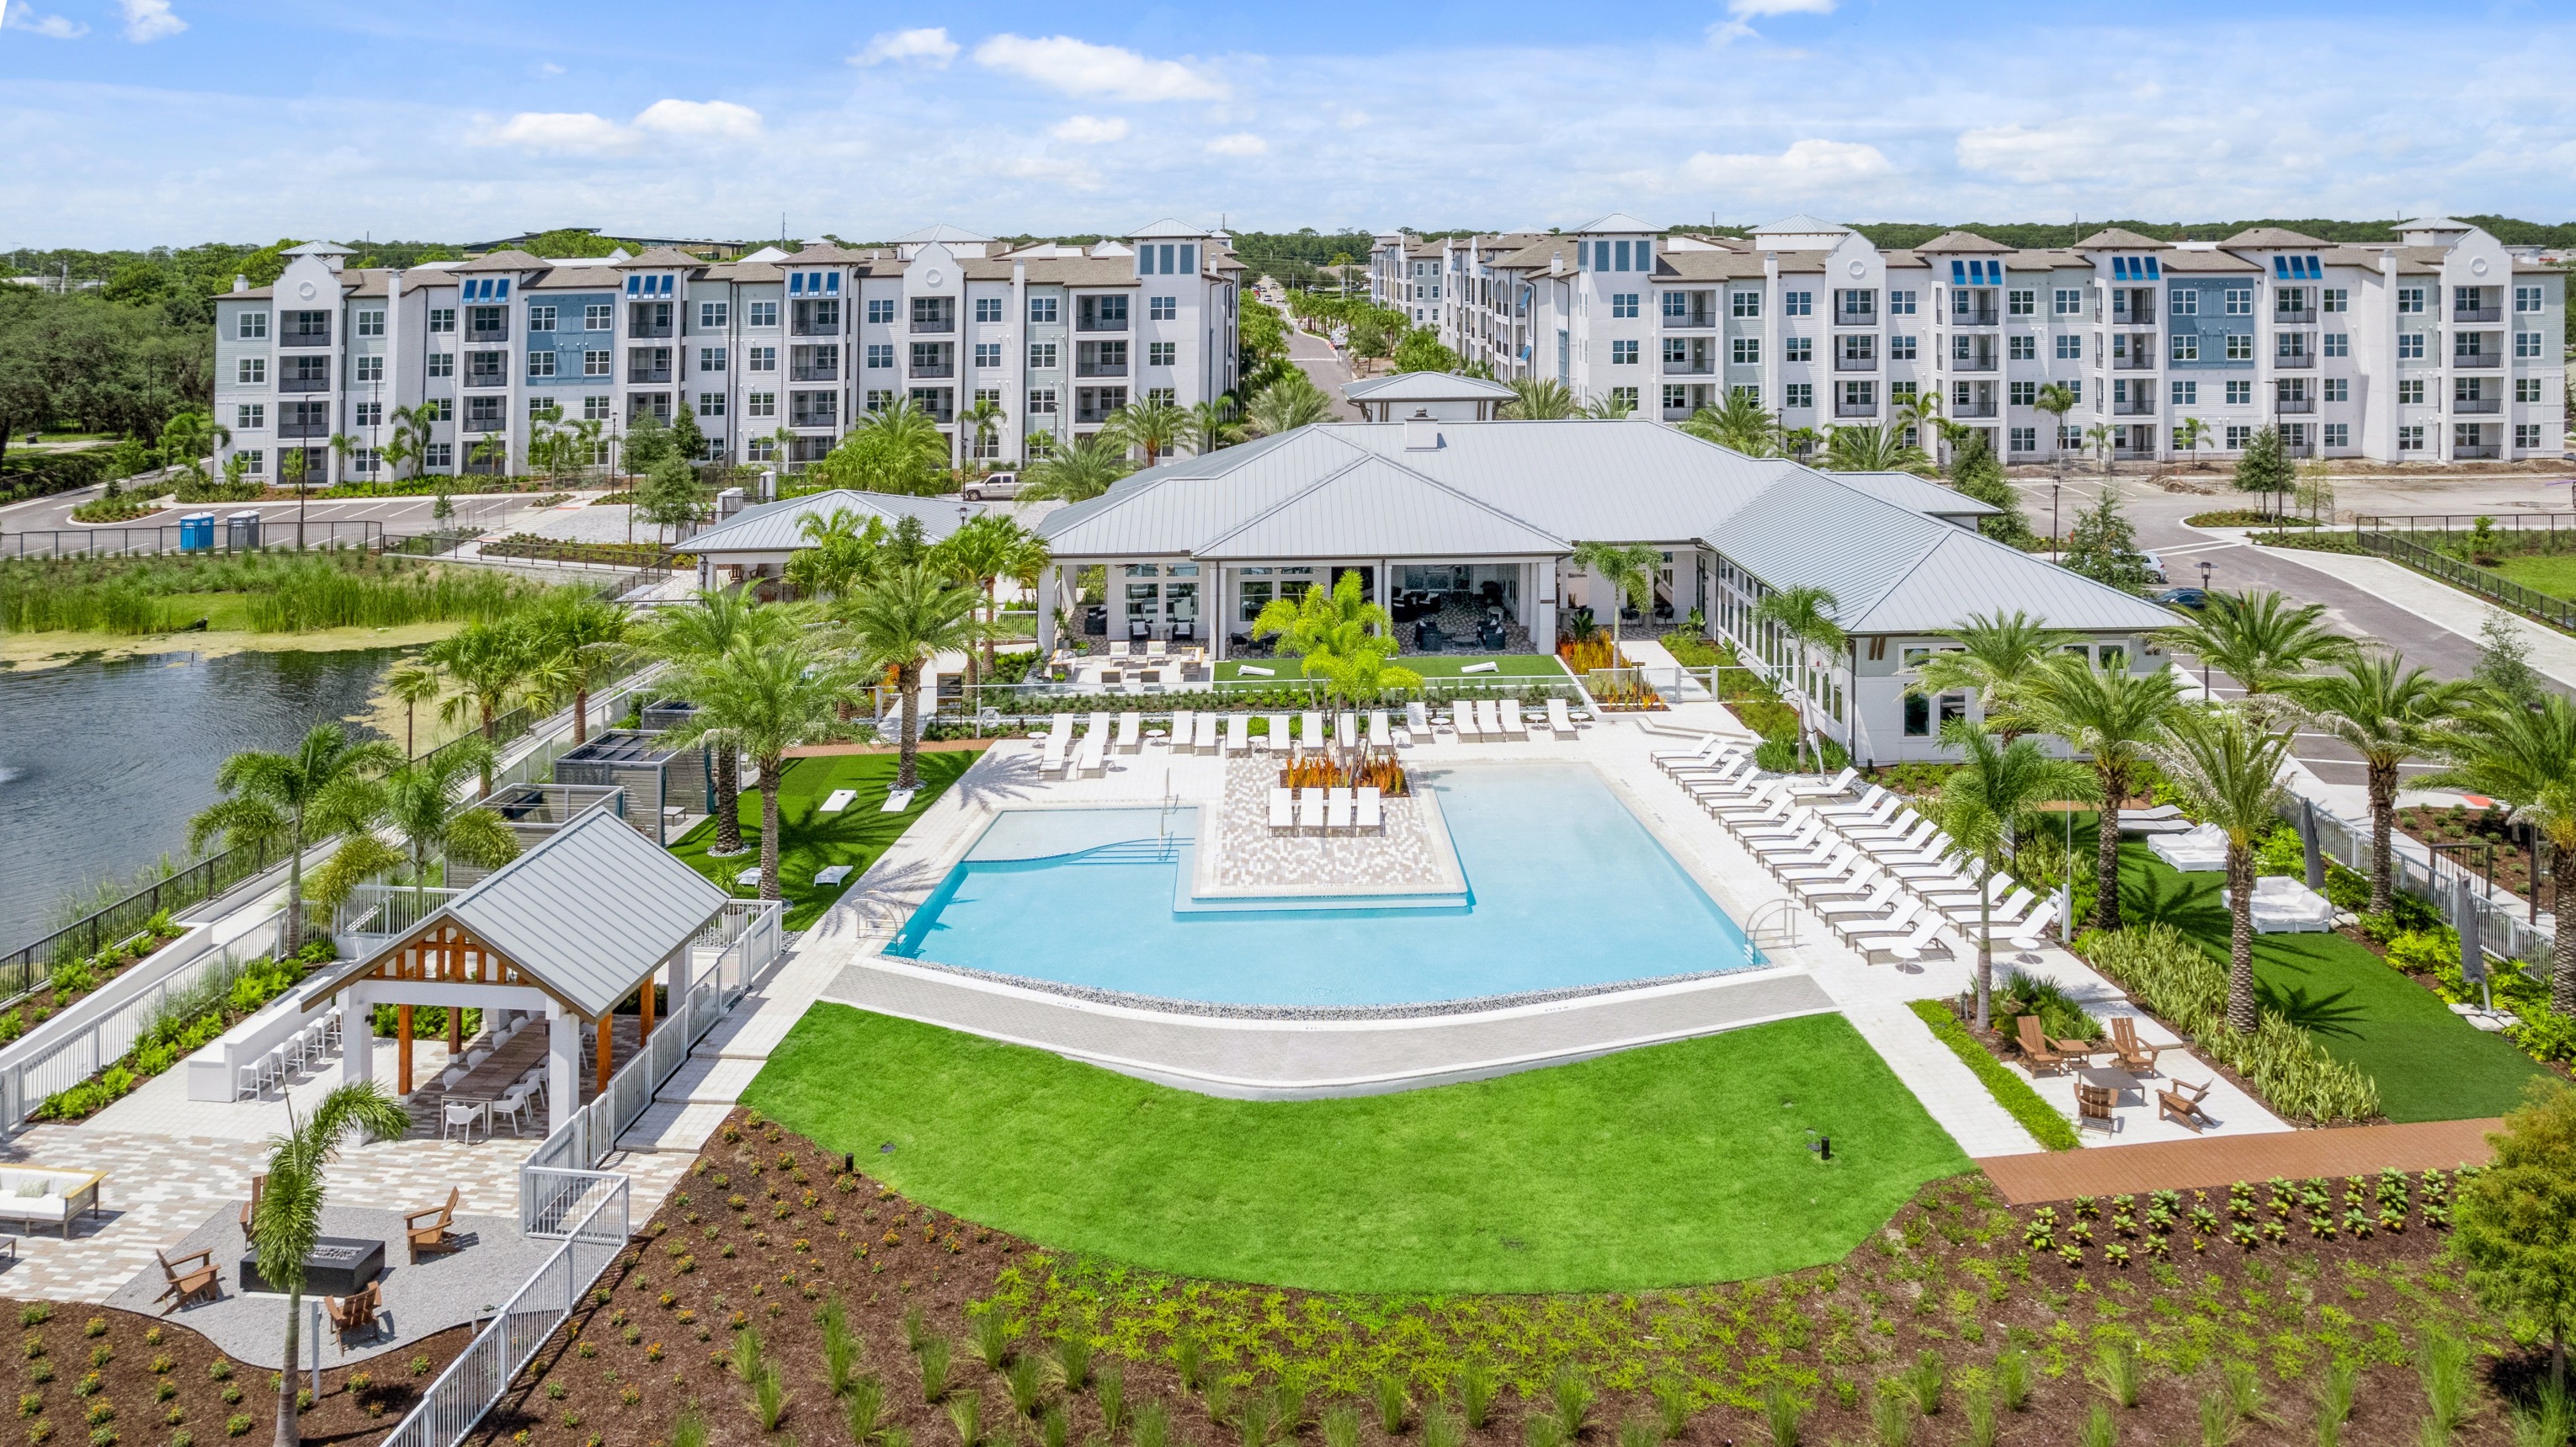 Bainbridge Mission Pointe earned a 2023 CoStar Impact Award for its suite of luxury amenities offered in its lakefront setting.